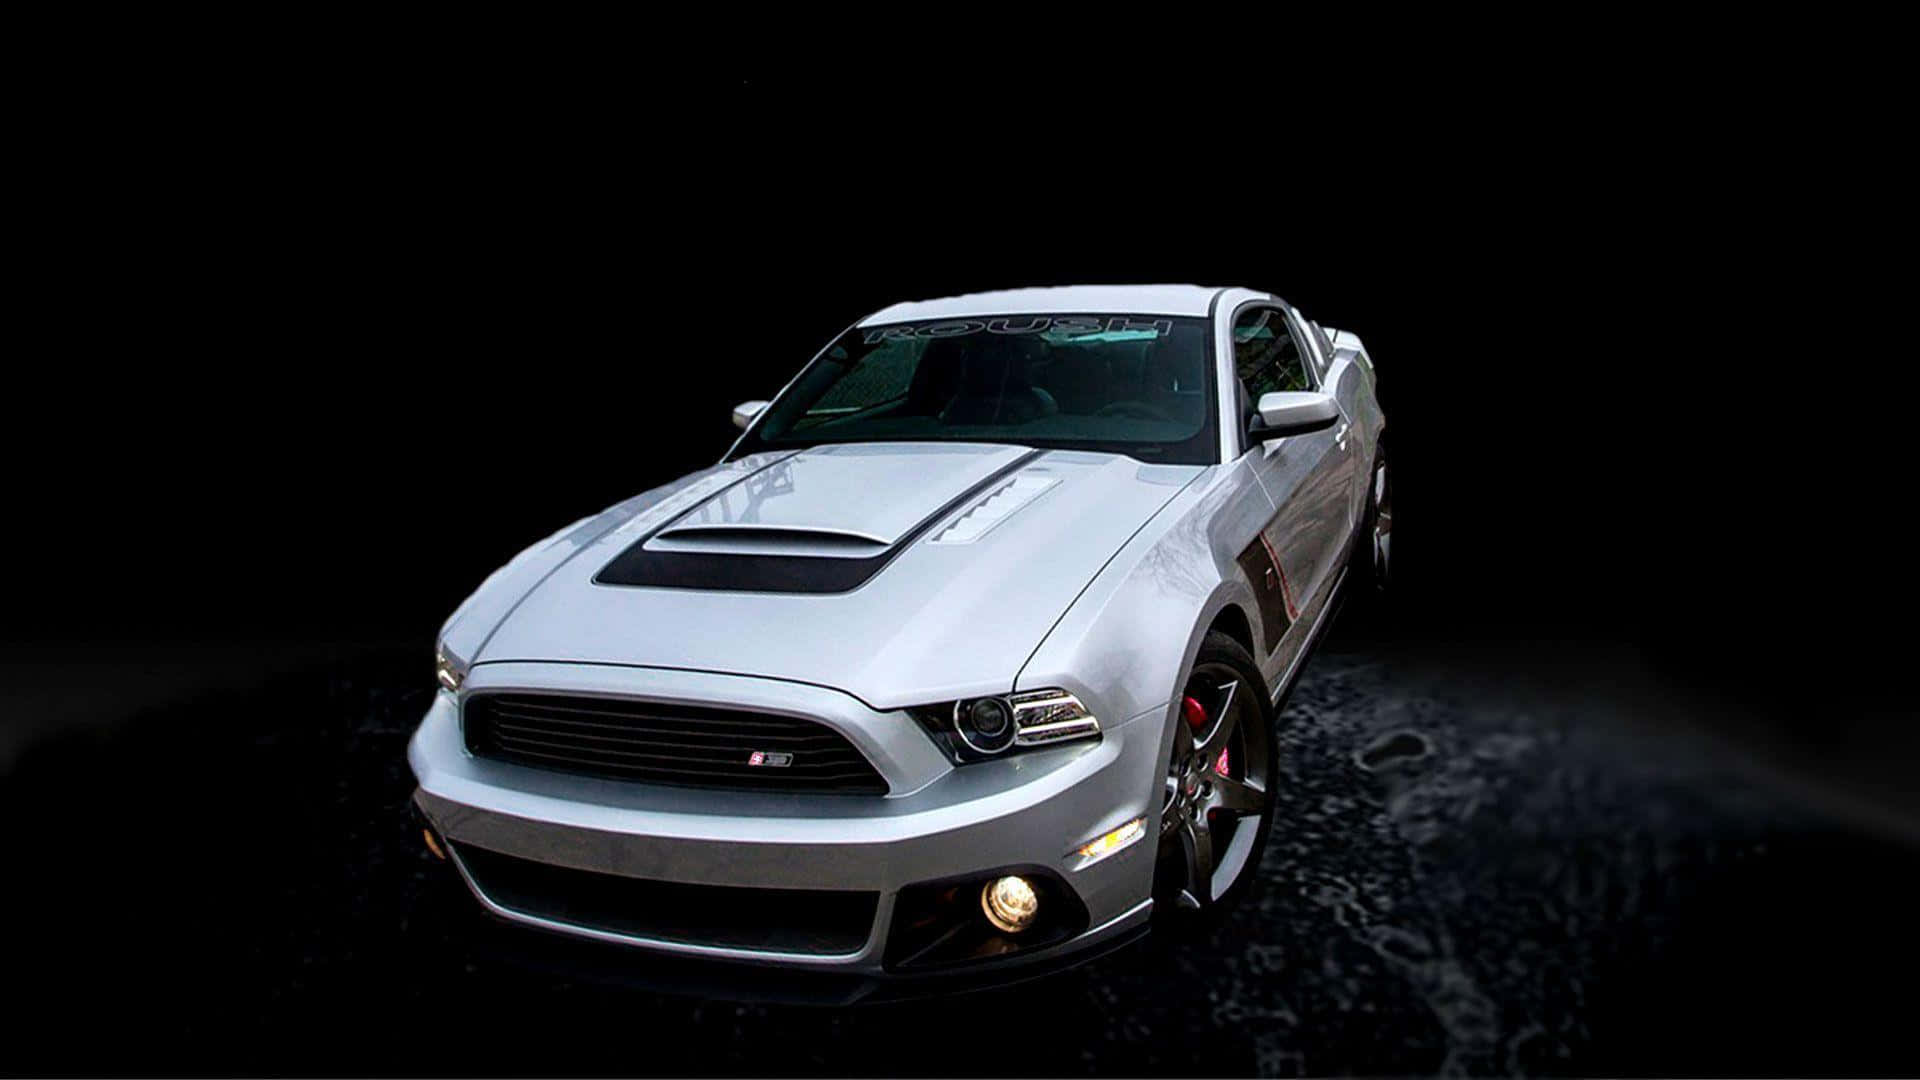 Race-Ready Ford Mustang Roush on the Track Wallpaper